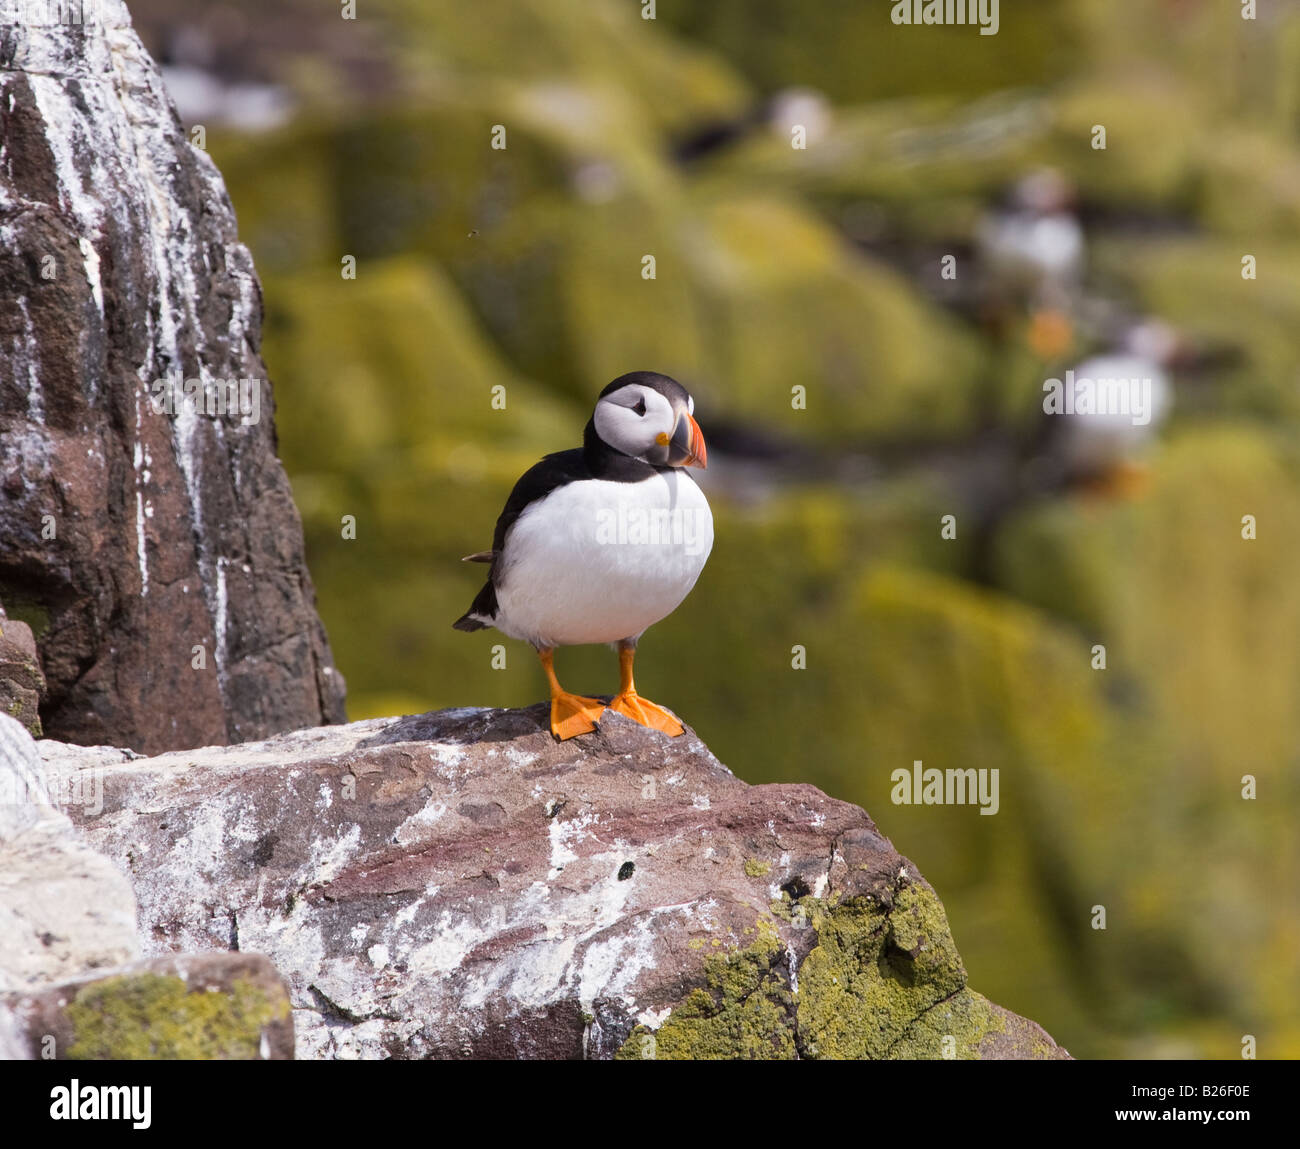 Puffin sitting on rocky cliff Stock Photo